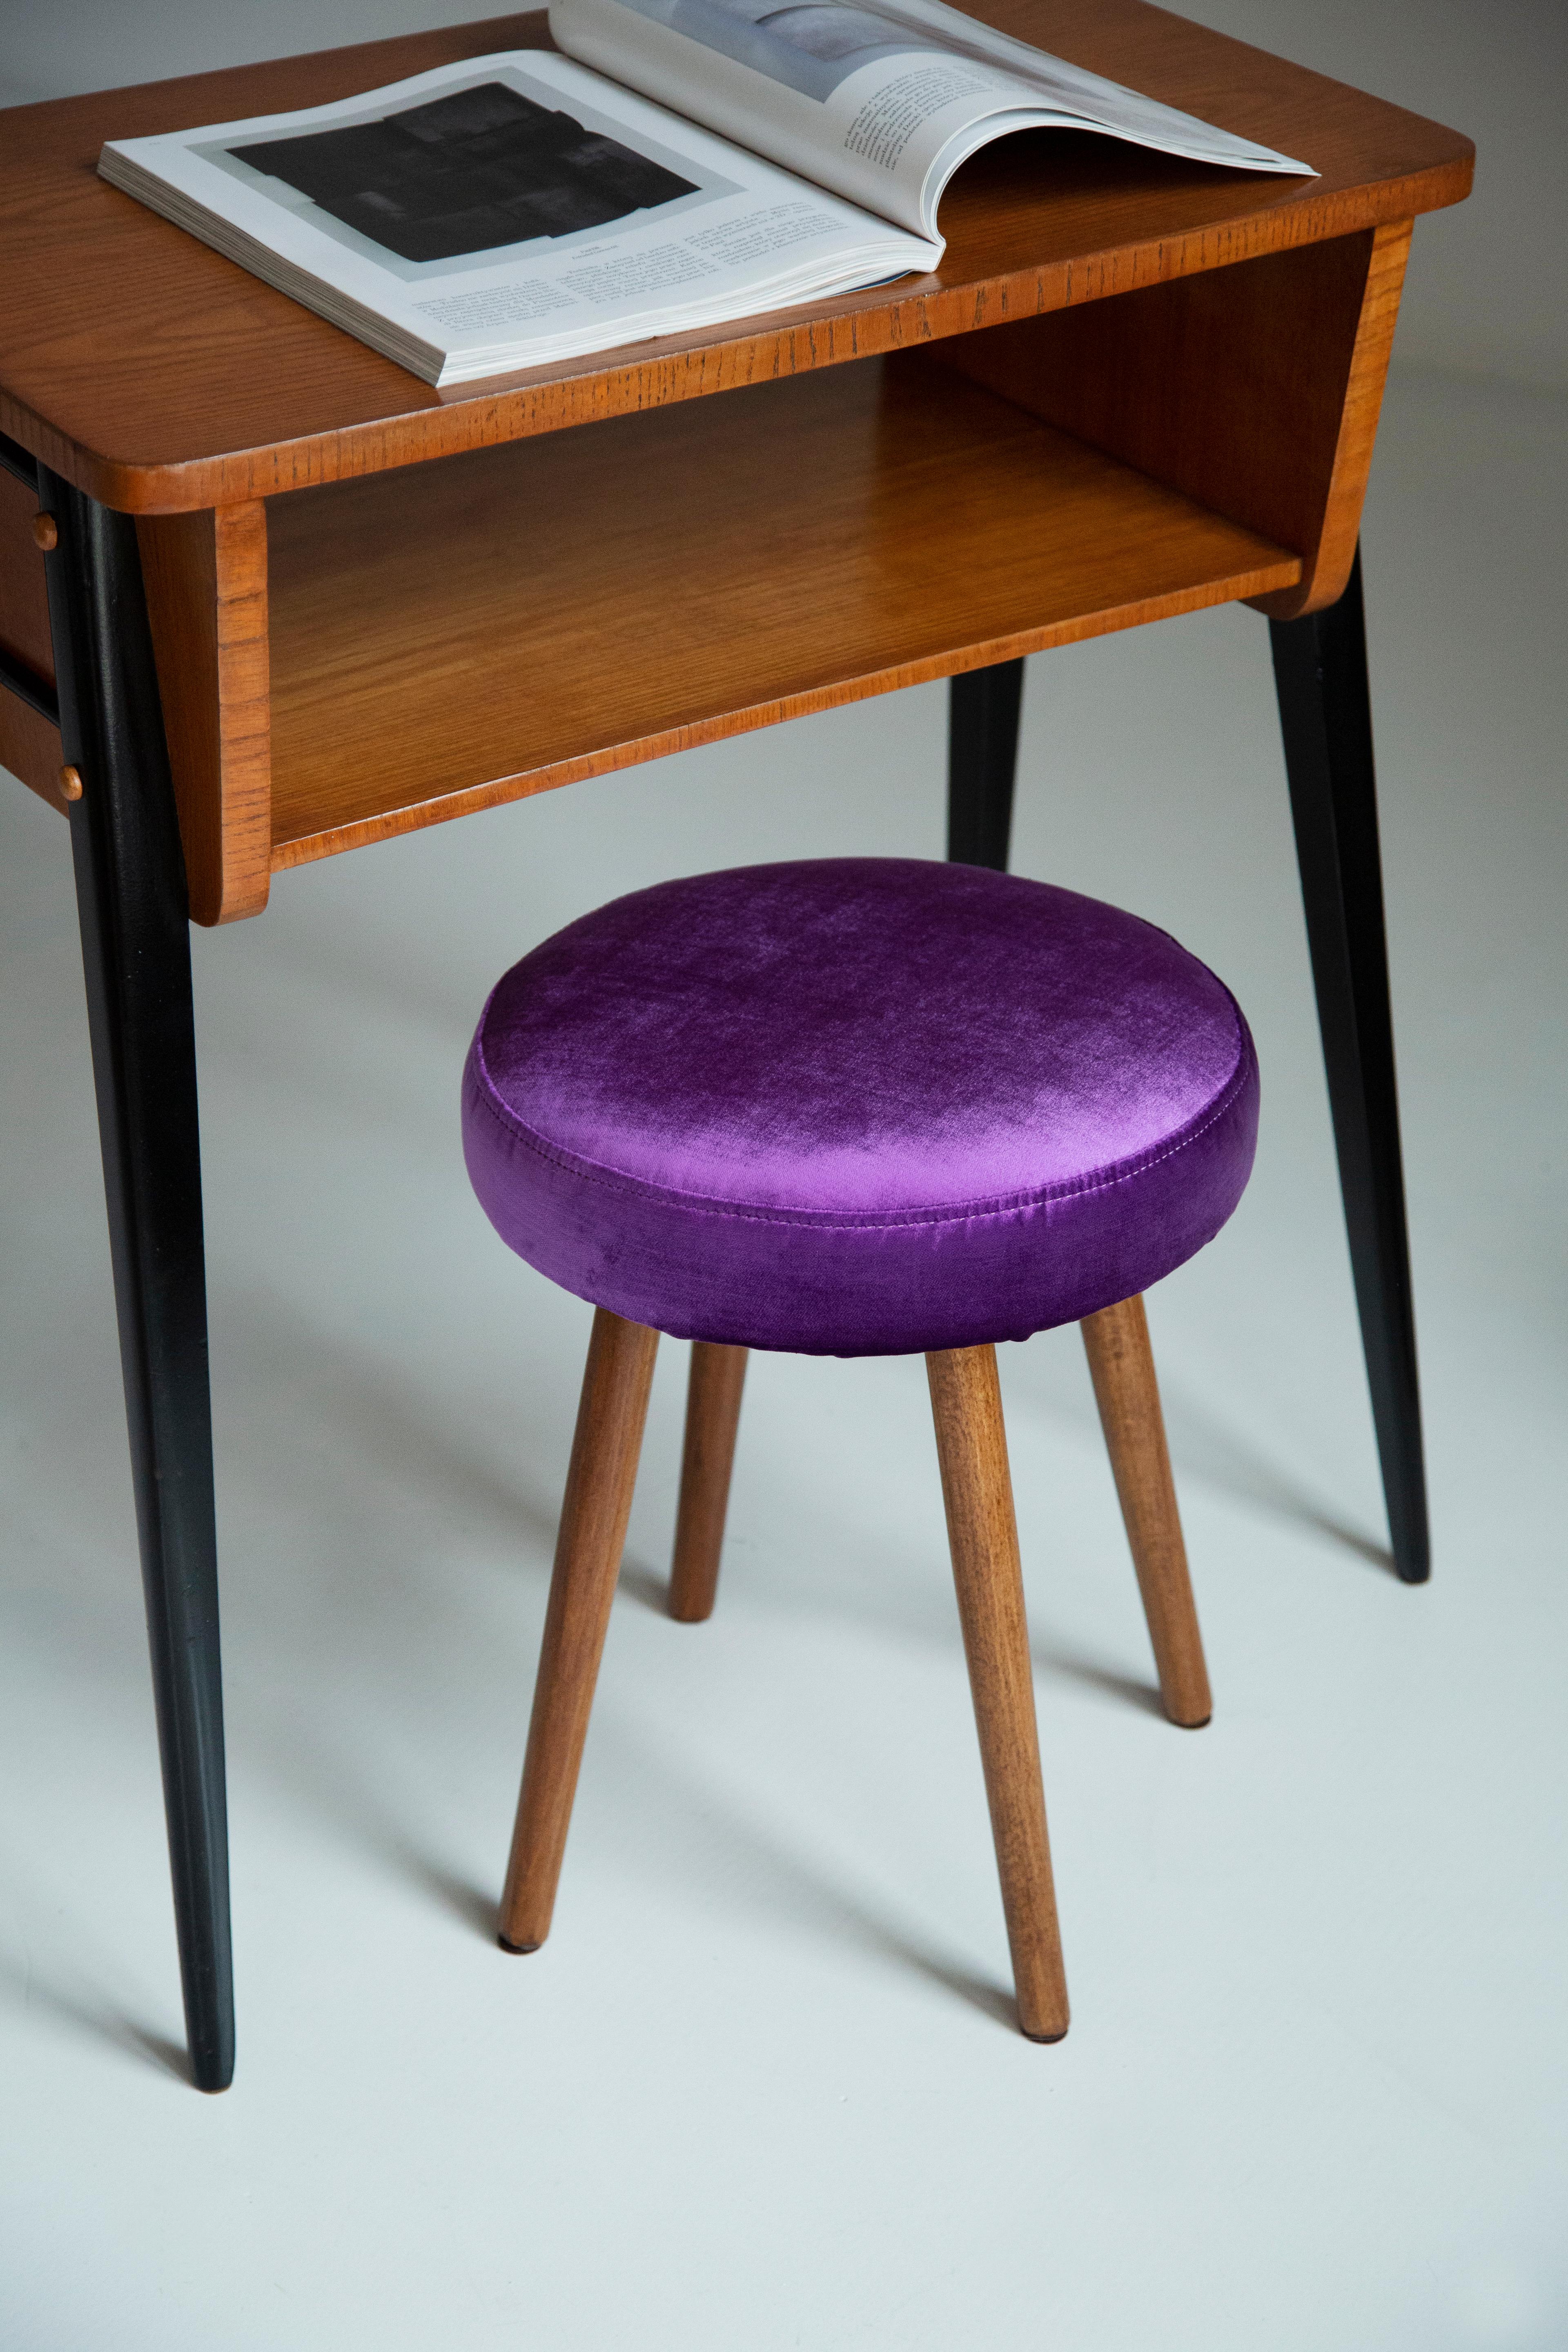 Stool from the turn of the 1960s and 1970s. Beautiful glossy purple color velvet upholstery. The stool consists of an upholstered part, a seat and wooden legs narrowing downwards, characteristic of the 1960s style. We can prepare this pair also in